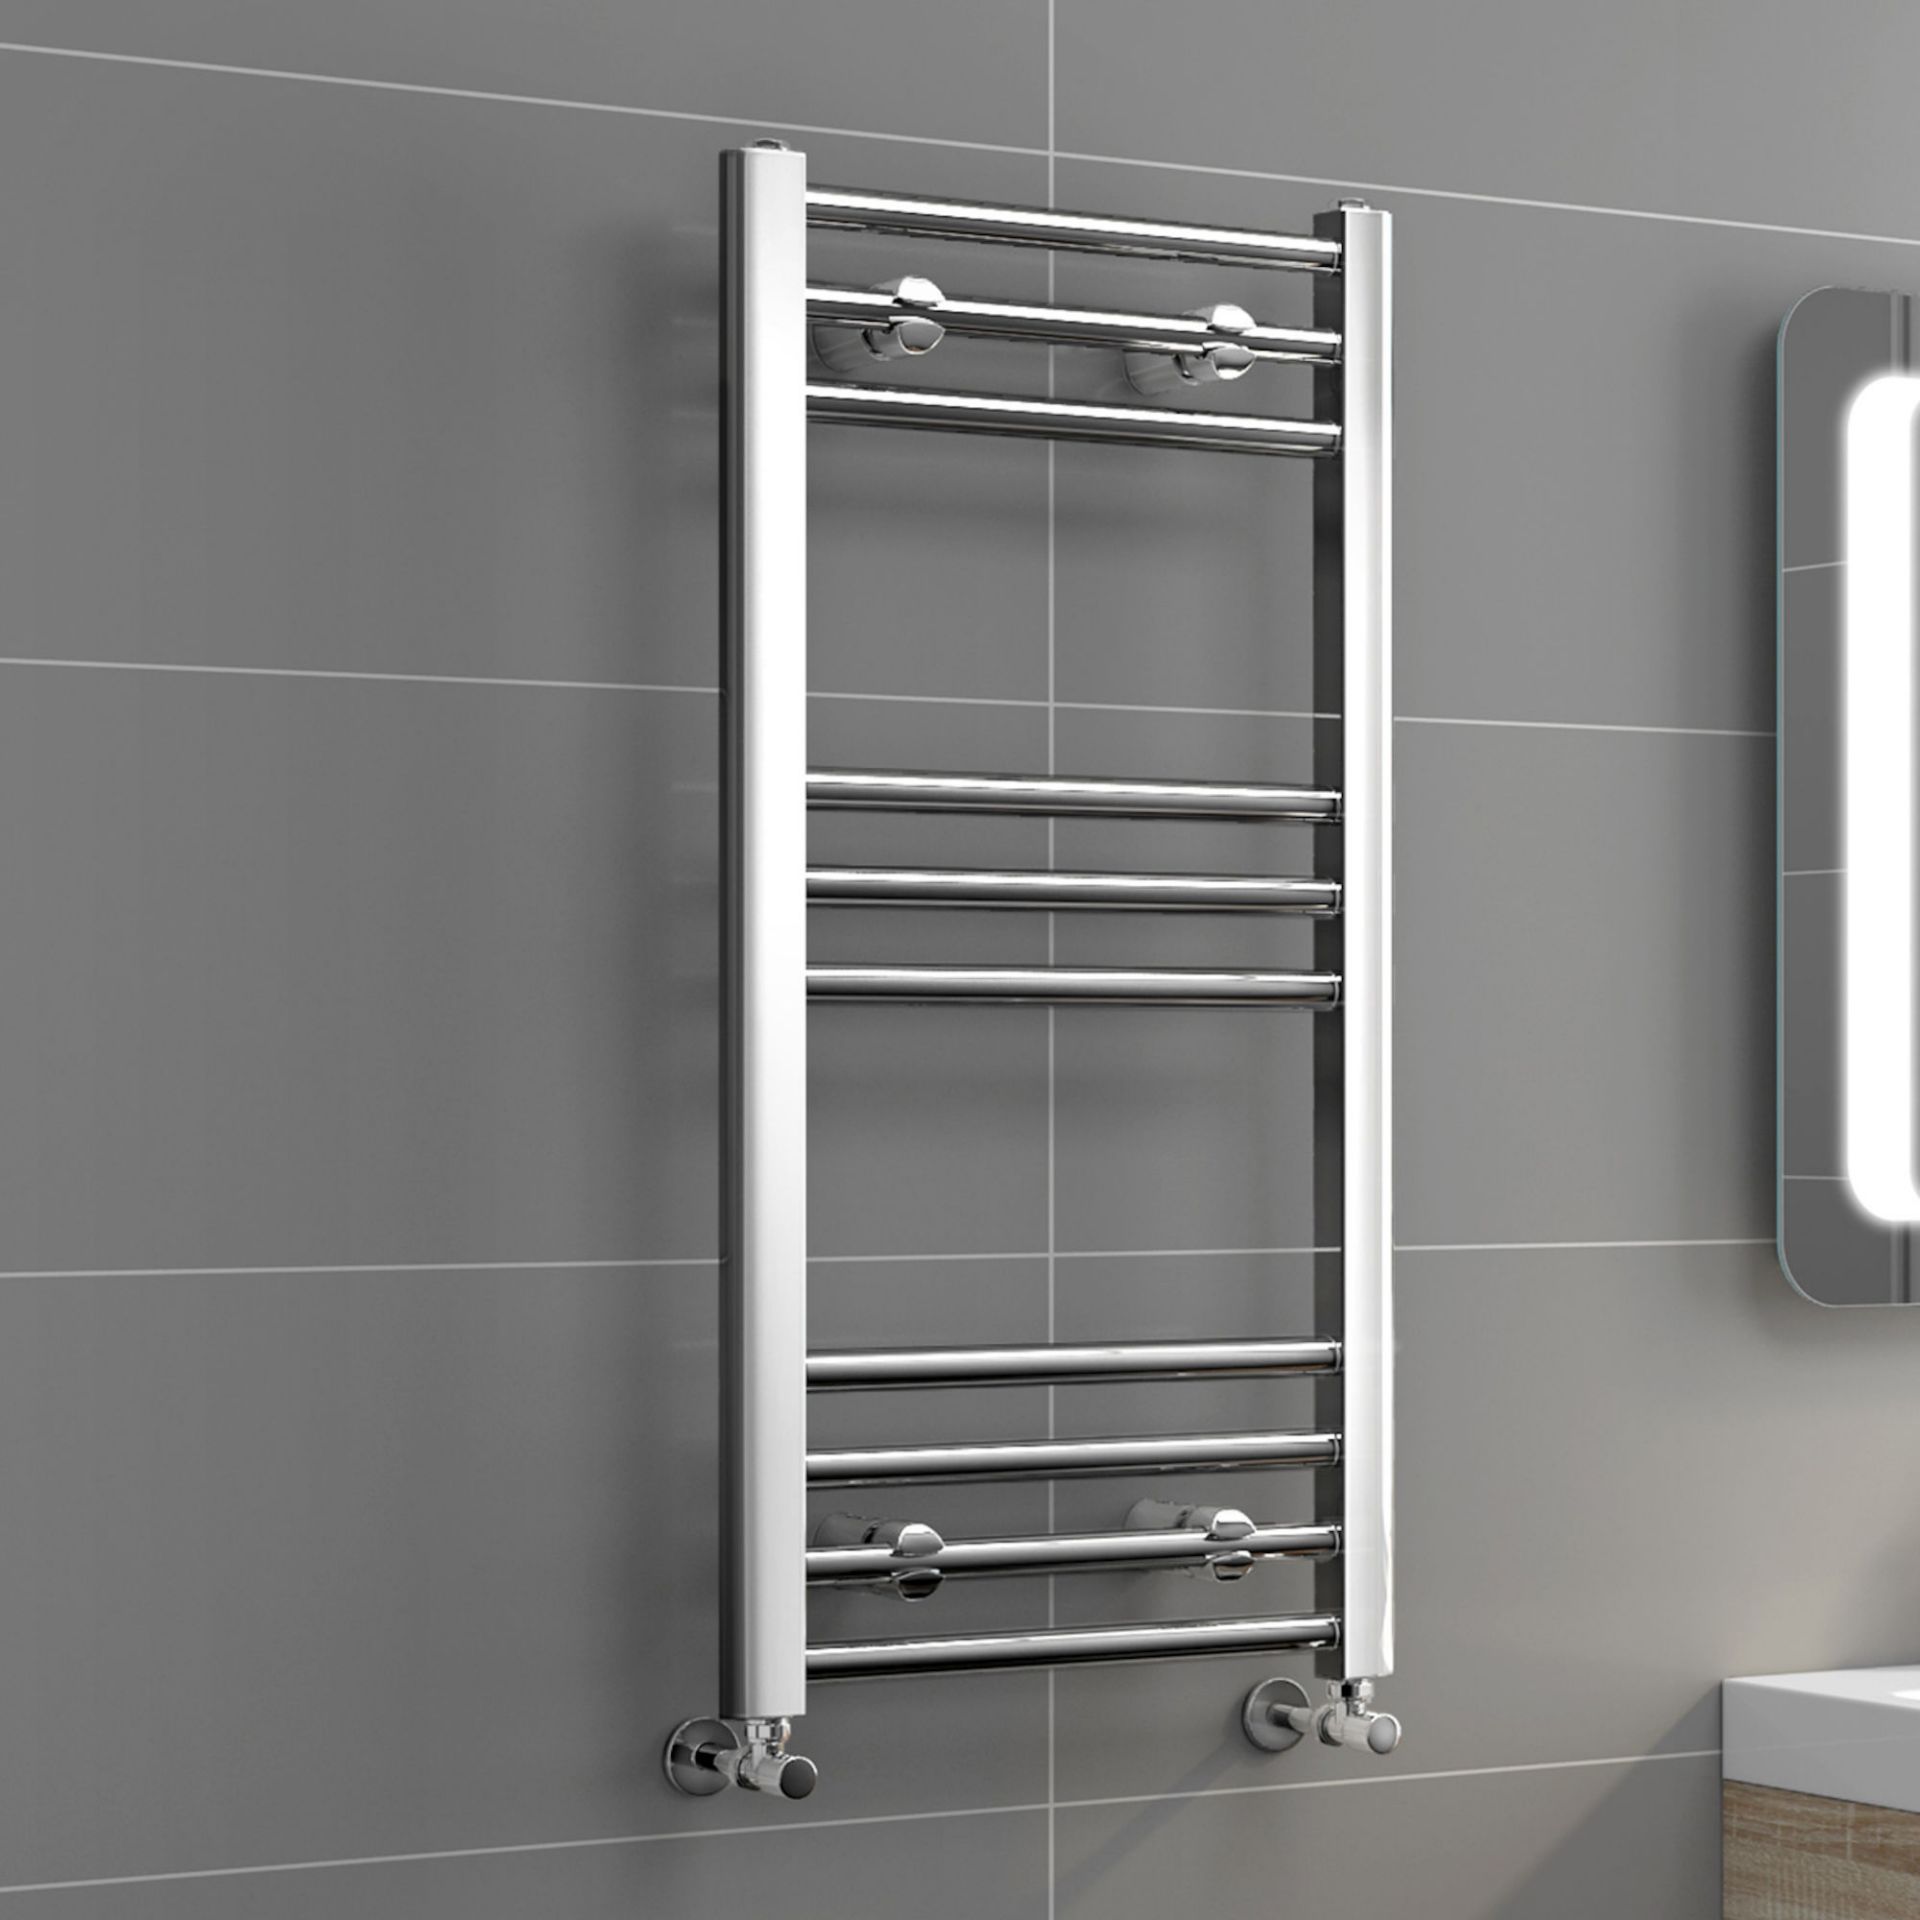 (H49) 800x400mm - 20mm Tubes - Chrome Heated Straight Rail Ladder Towel Radiator We also use t...